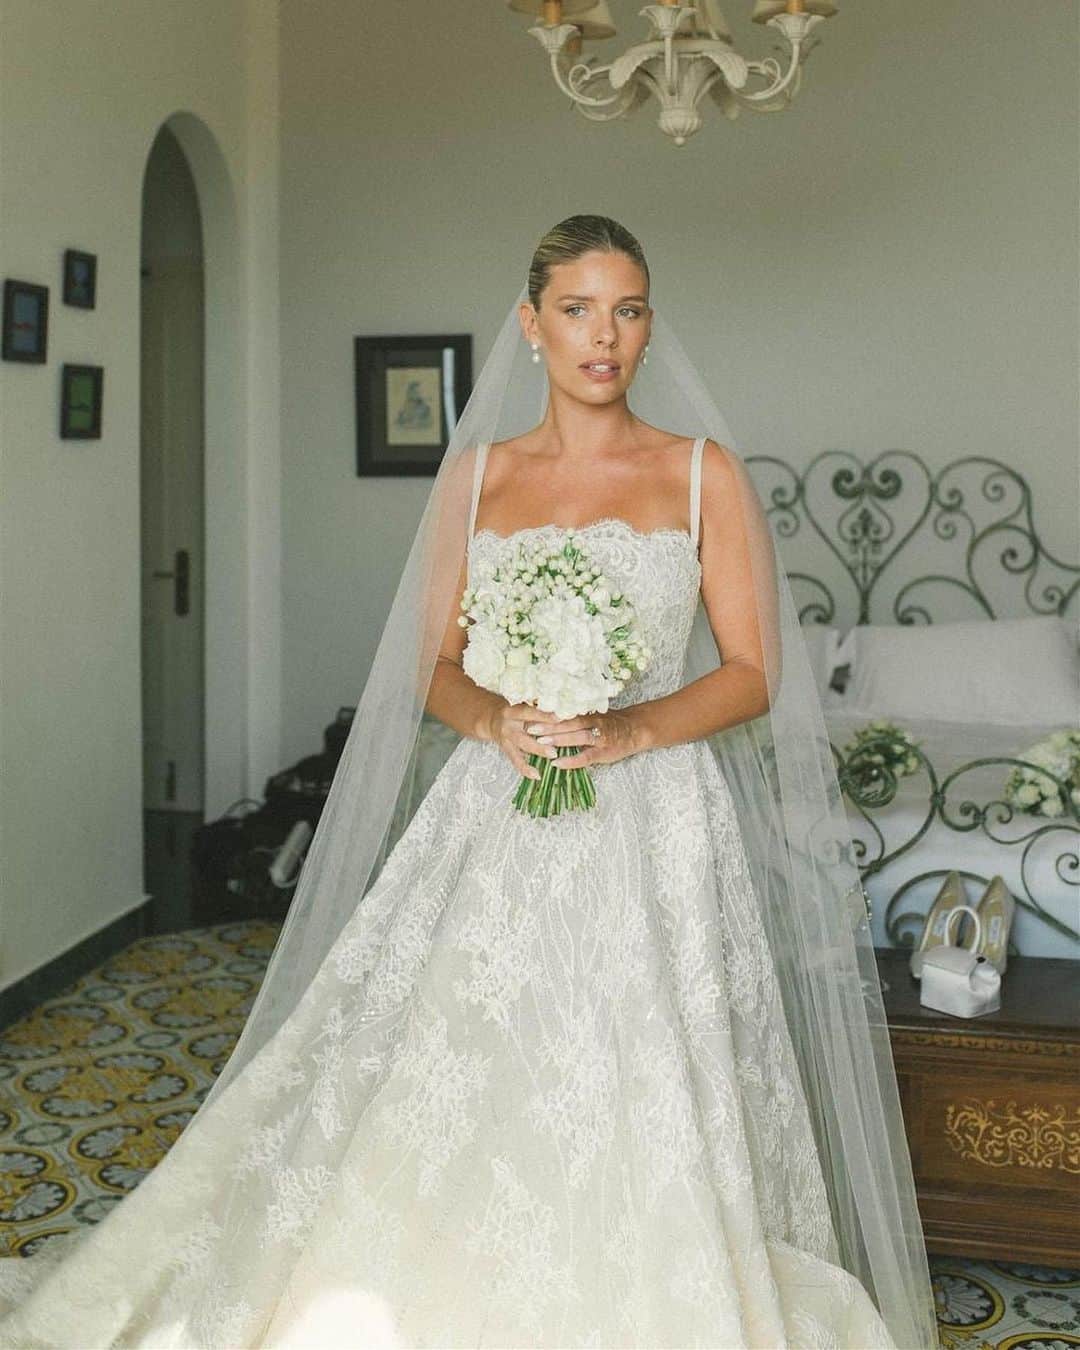 Steven Khalilのインスタグラム：「Congratulations to our beautiful custom couture STEVEN KHALIL bride @tashoakley as featured in @vogueaustralia  ⠀⠀⠀⠀⠀⠀⠀⠀⠀ 'We designed a dress to be so much more than a classic lace wedding dress. We chose hand embroidery that would glisten in the sun with the shapes of coral and lines reminiscent of the sea, covered by a traditional lace and paired with a long lace veil."」